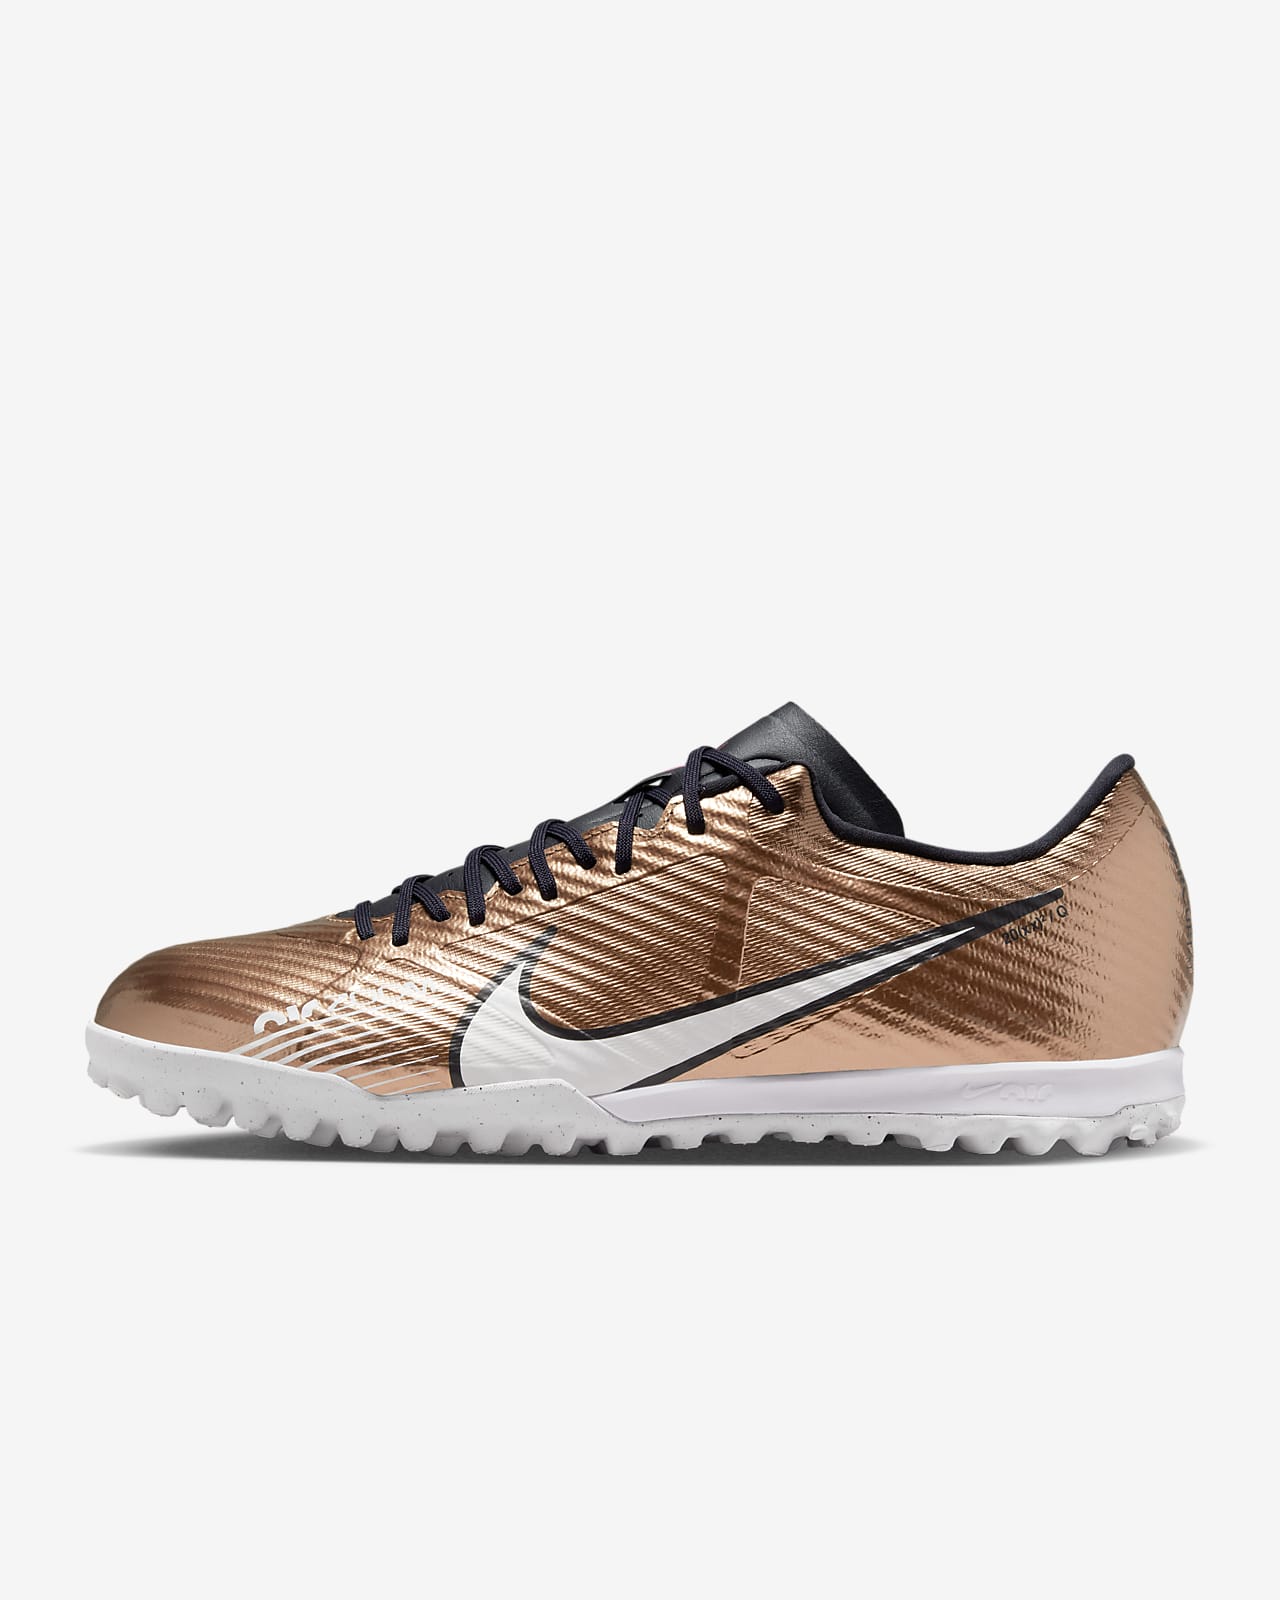 Chaussure de football pour surface synthétique Nike Zoom Mercurial Vapor 15 Academy TF